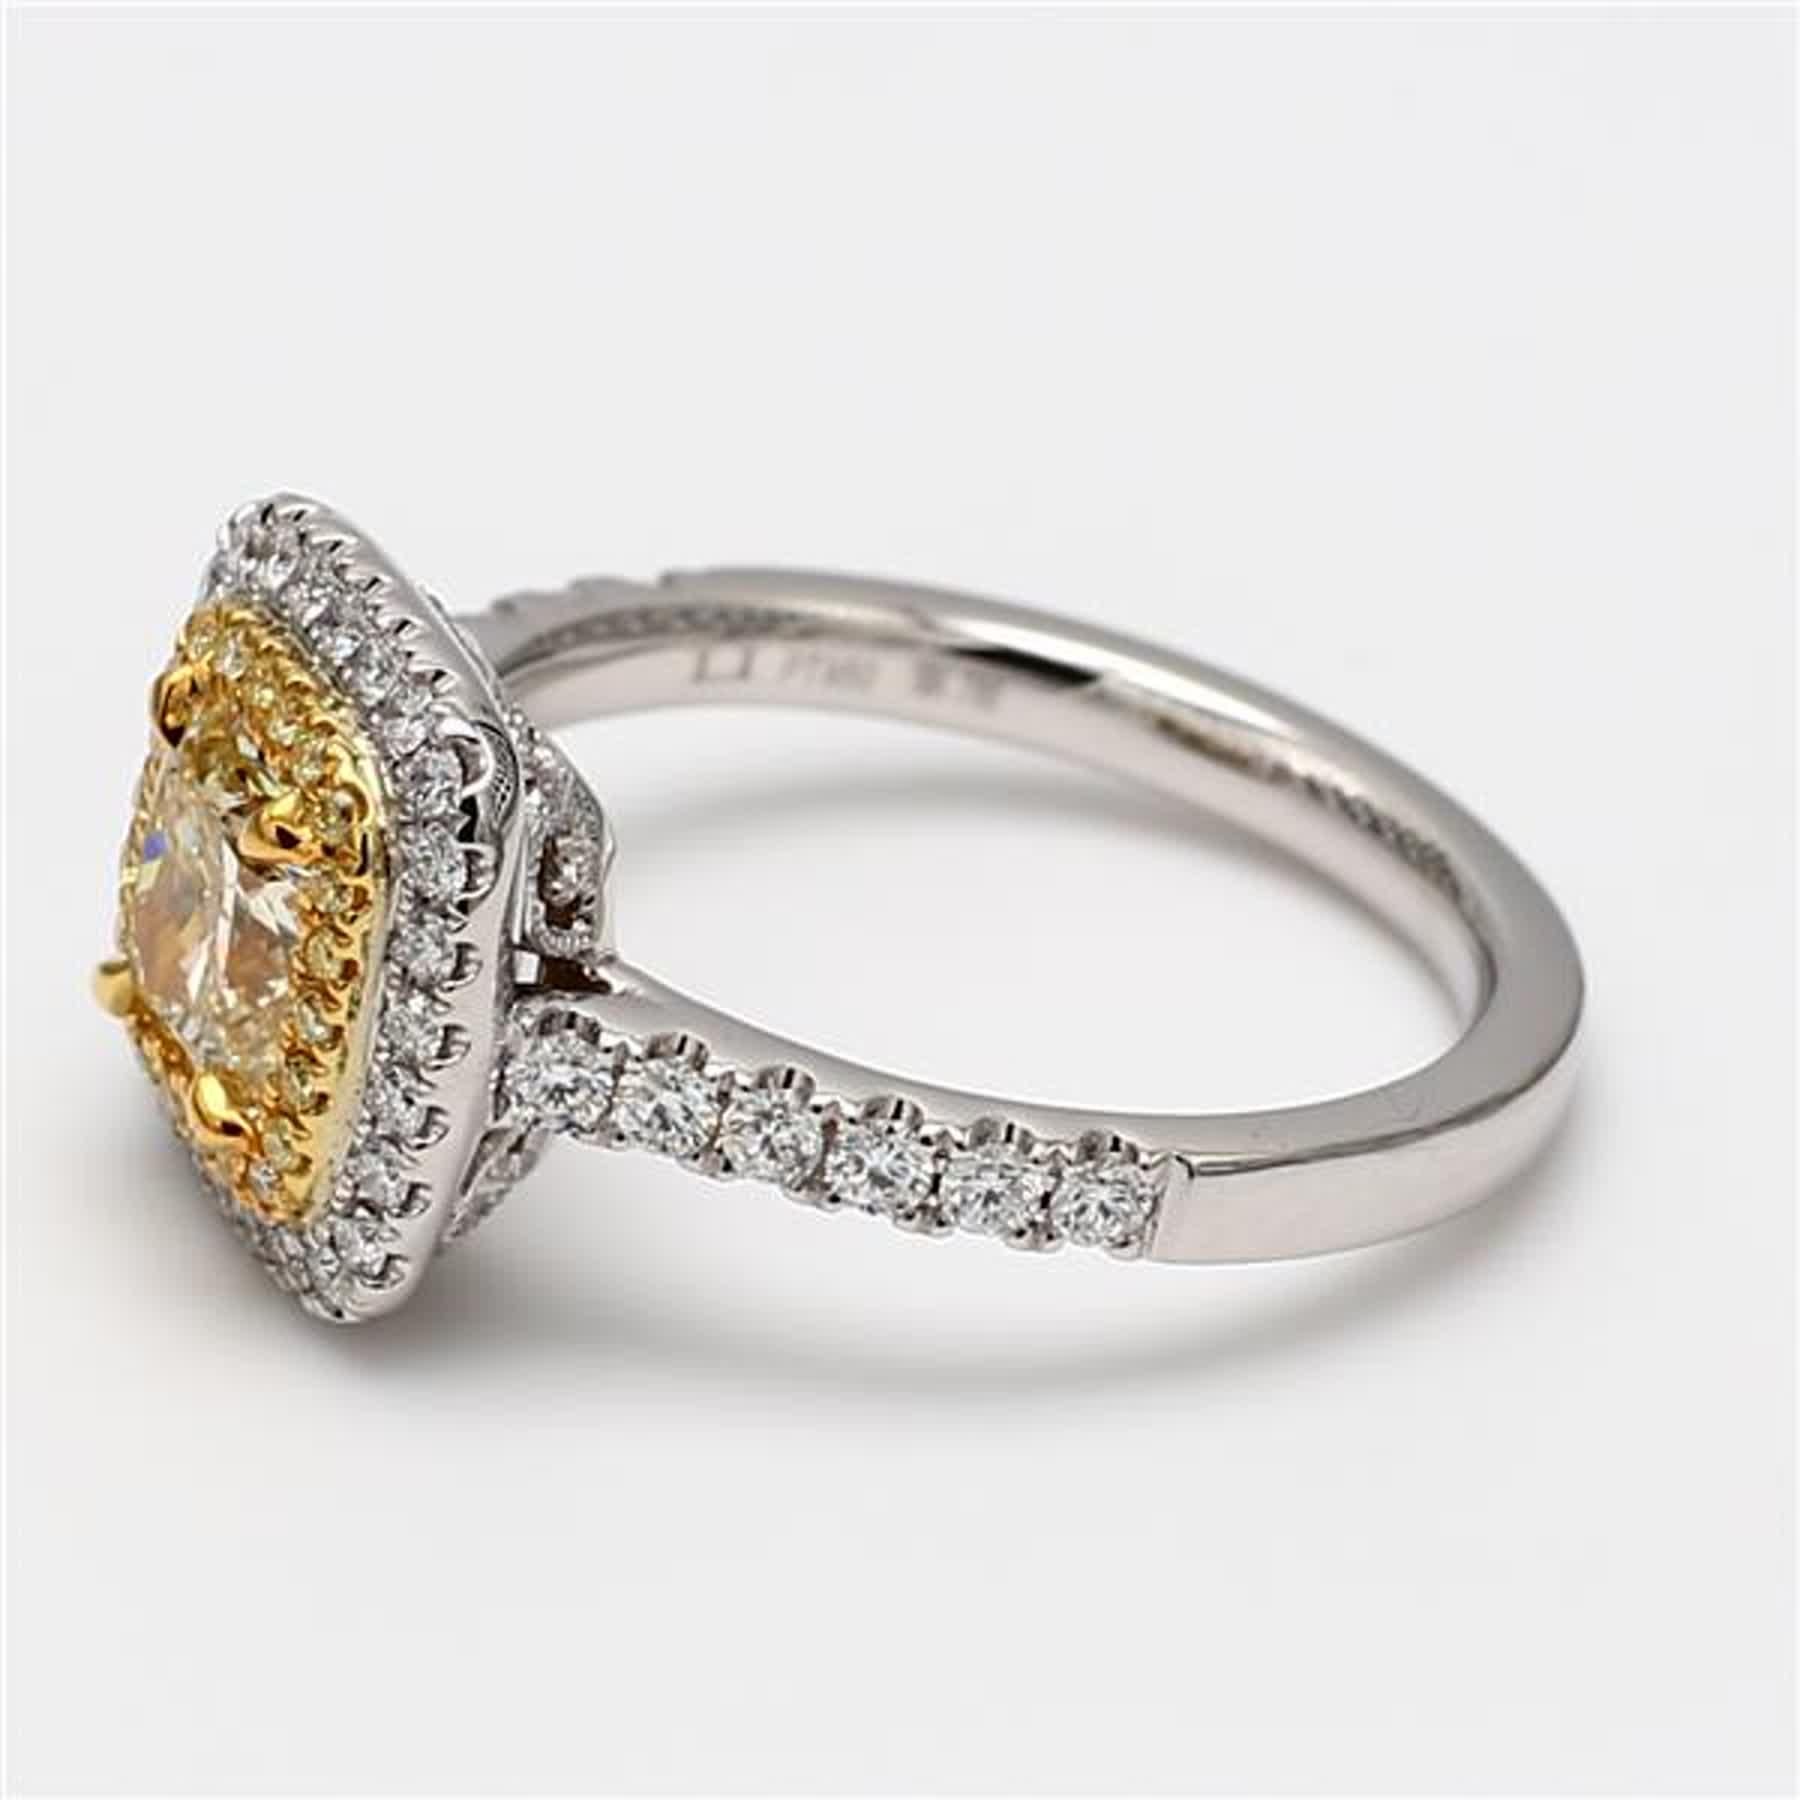 Contemporary GIA Certified Natural Yellow Cushion and White Diamond 1.71 Carat TW Plat Ring